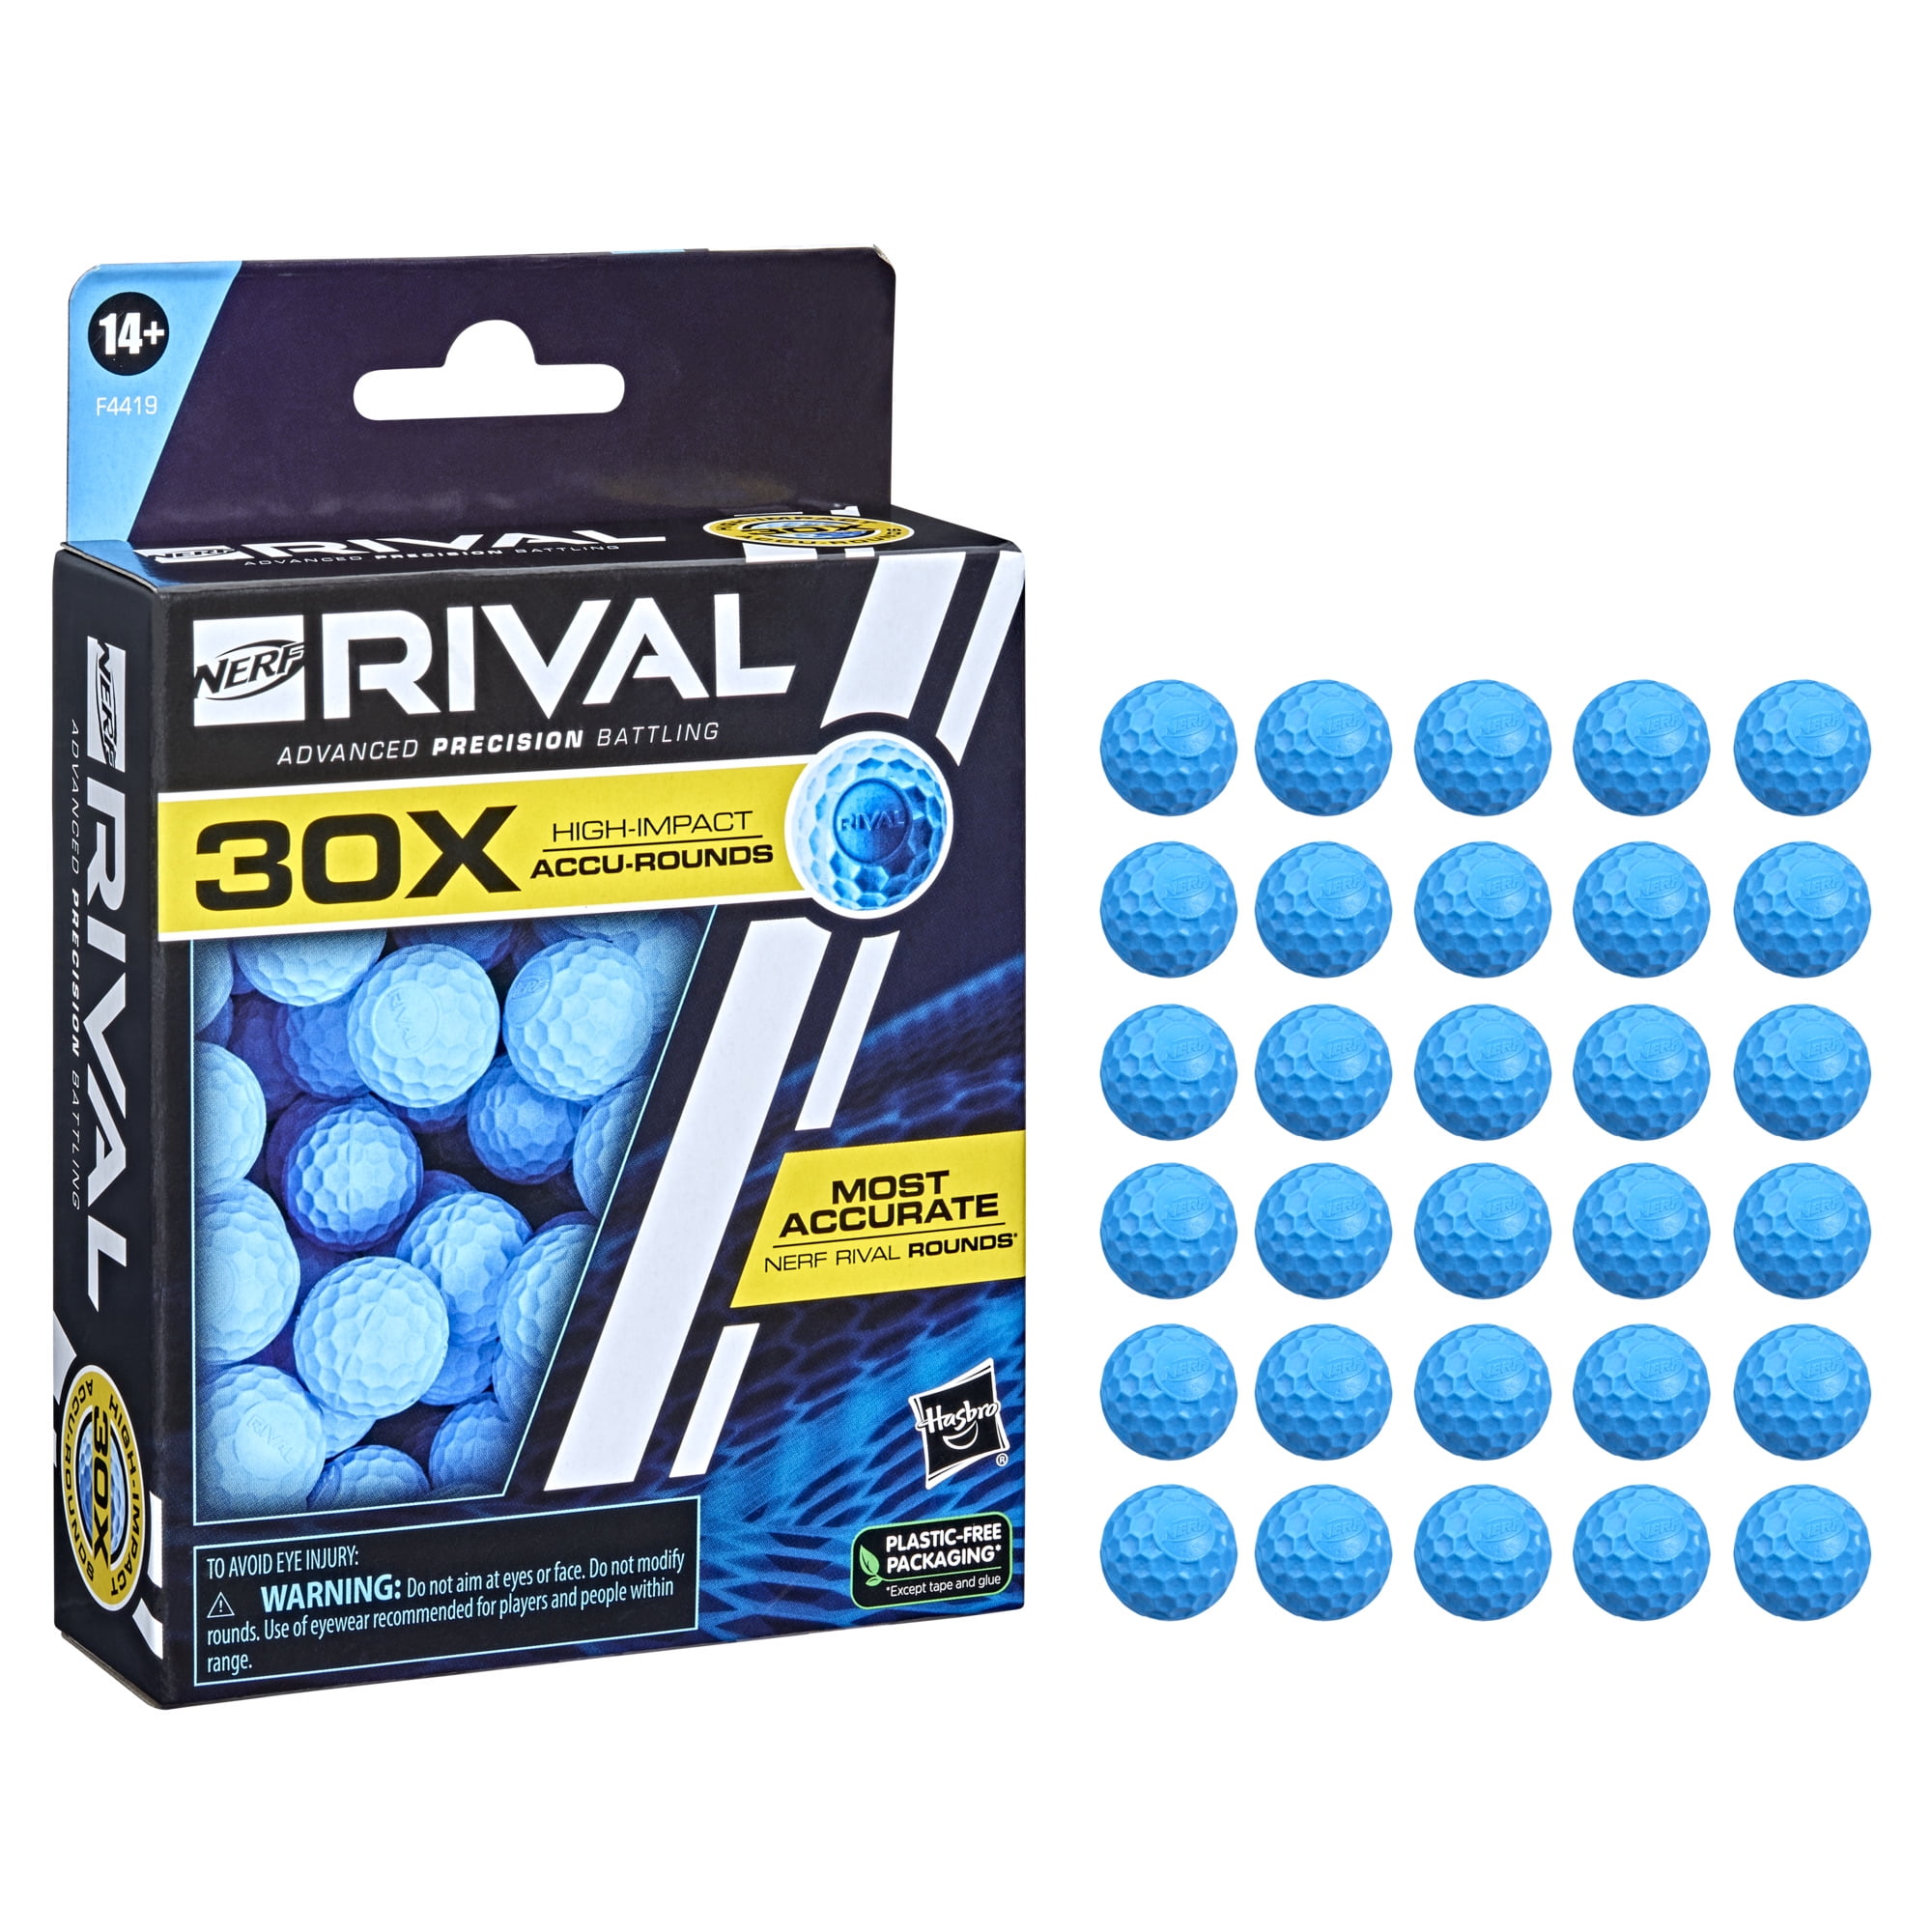 Nerf Rival 30 Accu-Round Refill, Includes 30 Nerf Rival Accu-Rounds